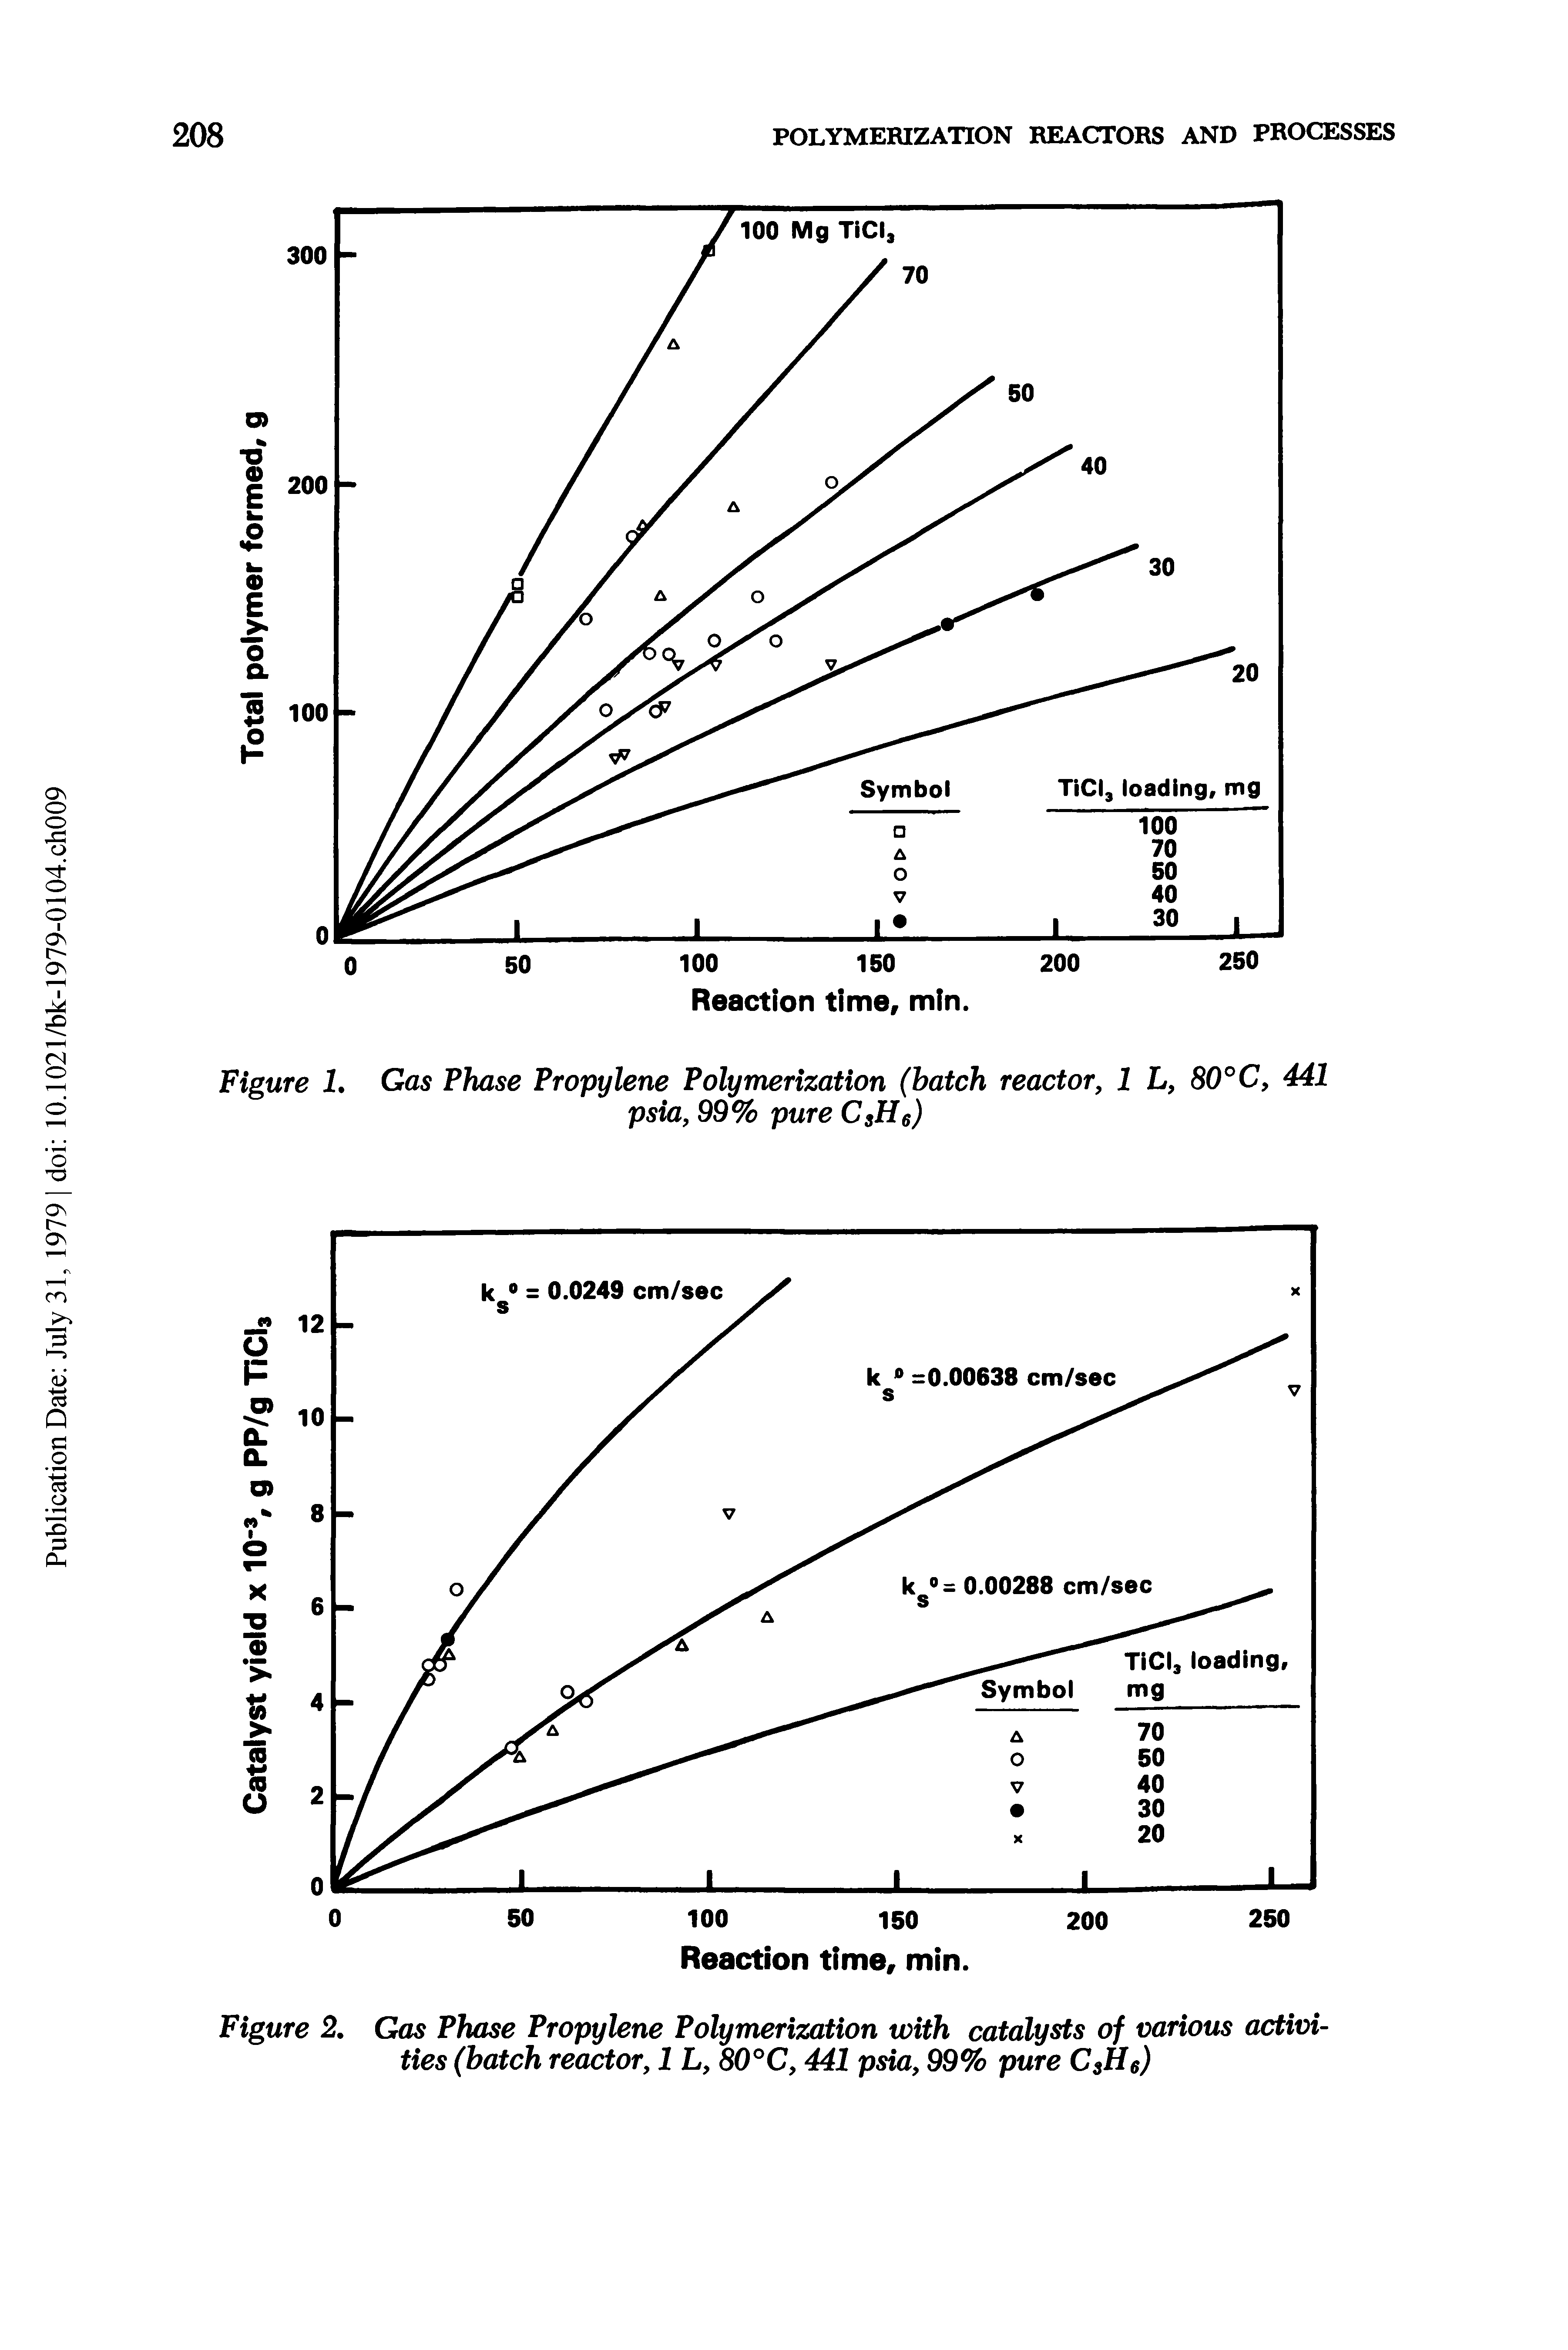 Figure 2. Gas Phase Propylene Polymerization with catalysts of various activities (batch reactor, 1L, 80°C, 441 psia, 99% pure C,He)...